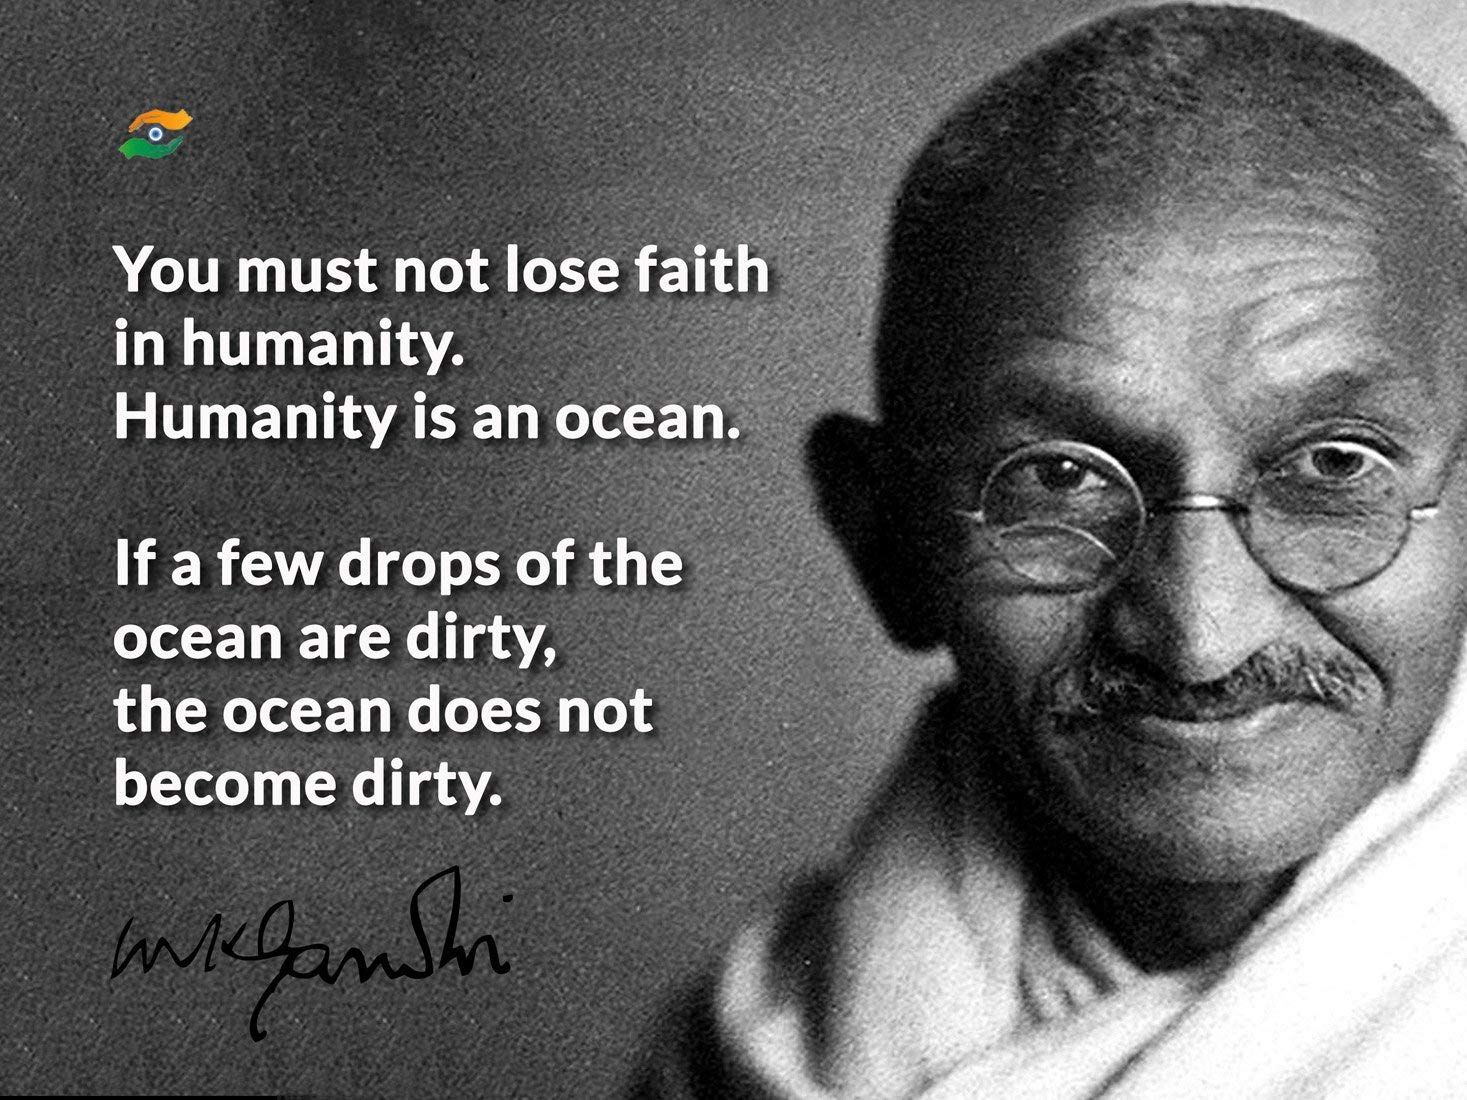 October Gandhi Jayanti 2020 Image, poster, HD wallpaper, photo, picture for Facebook Status and Whatsapp DP